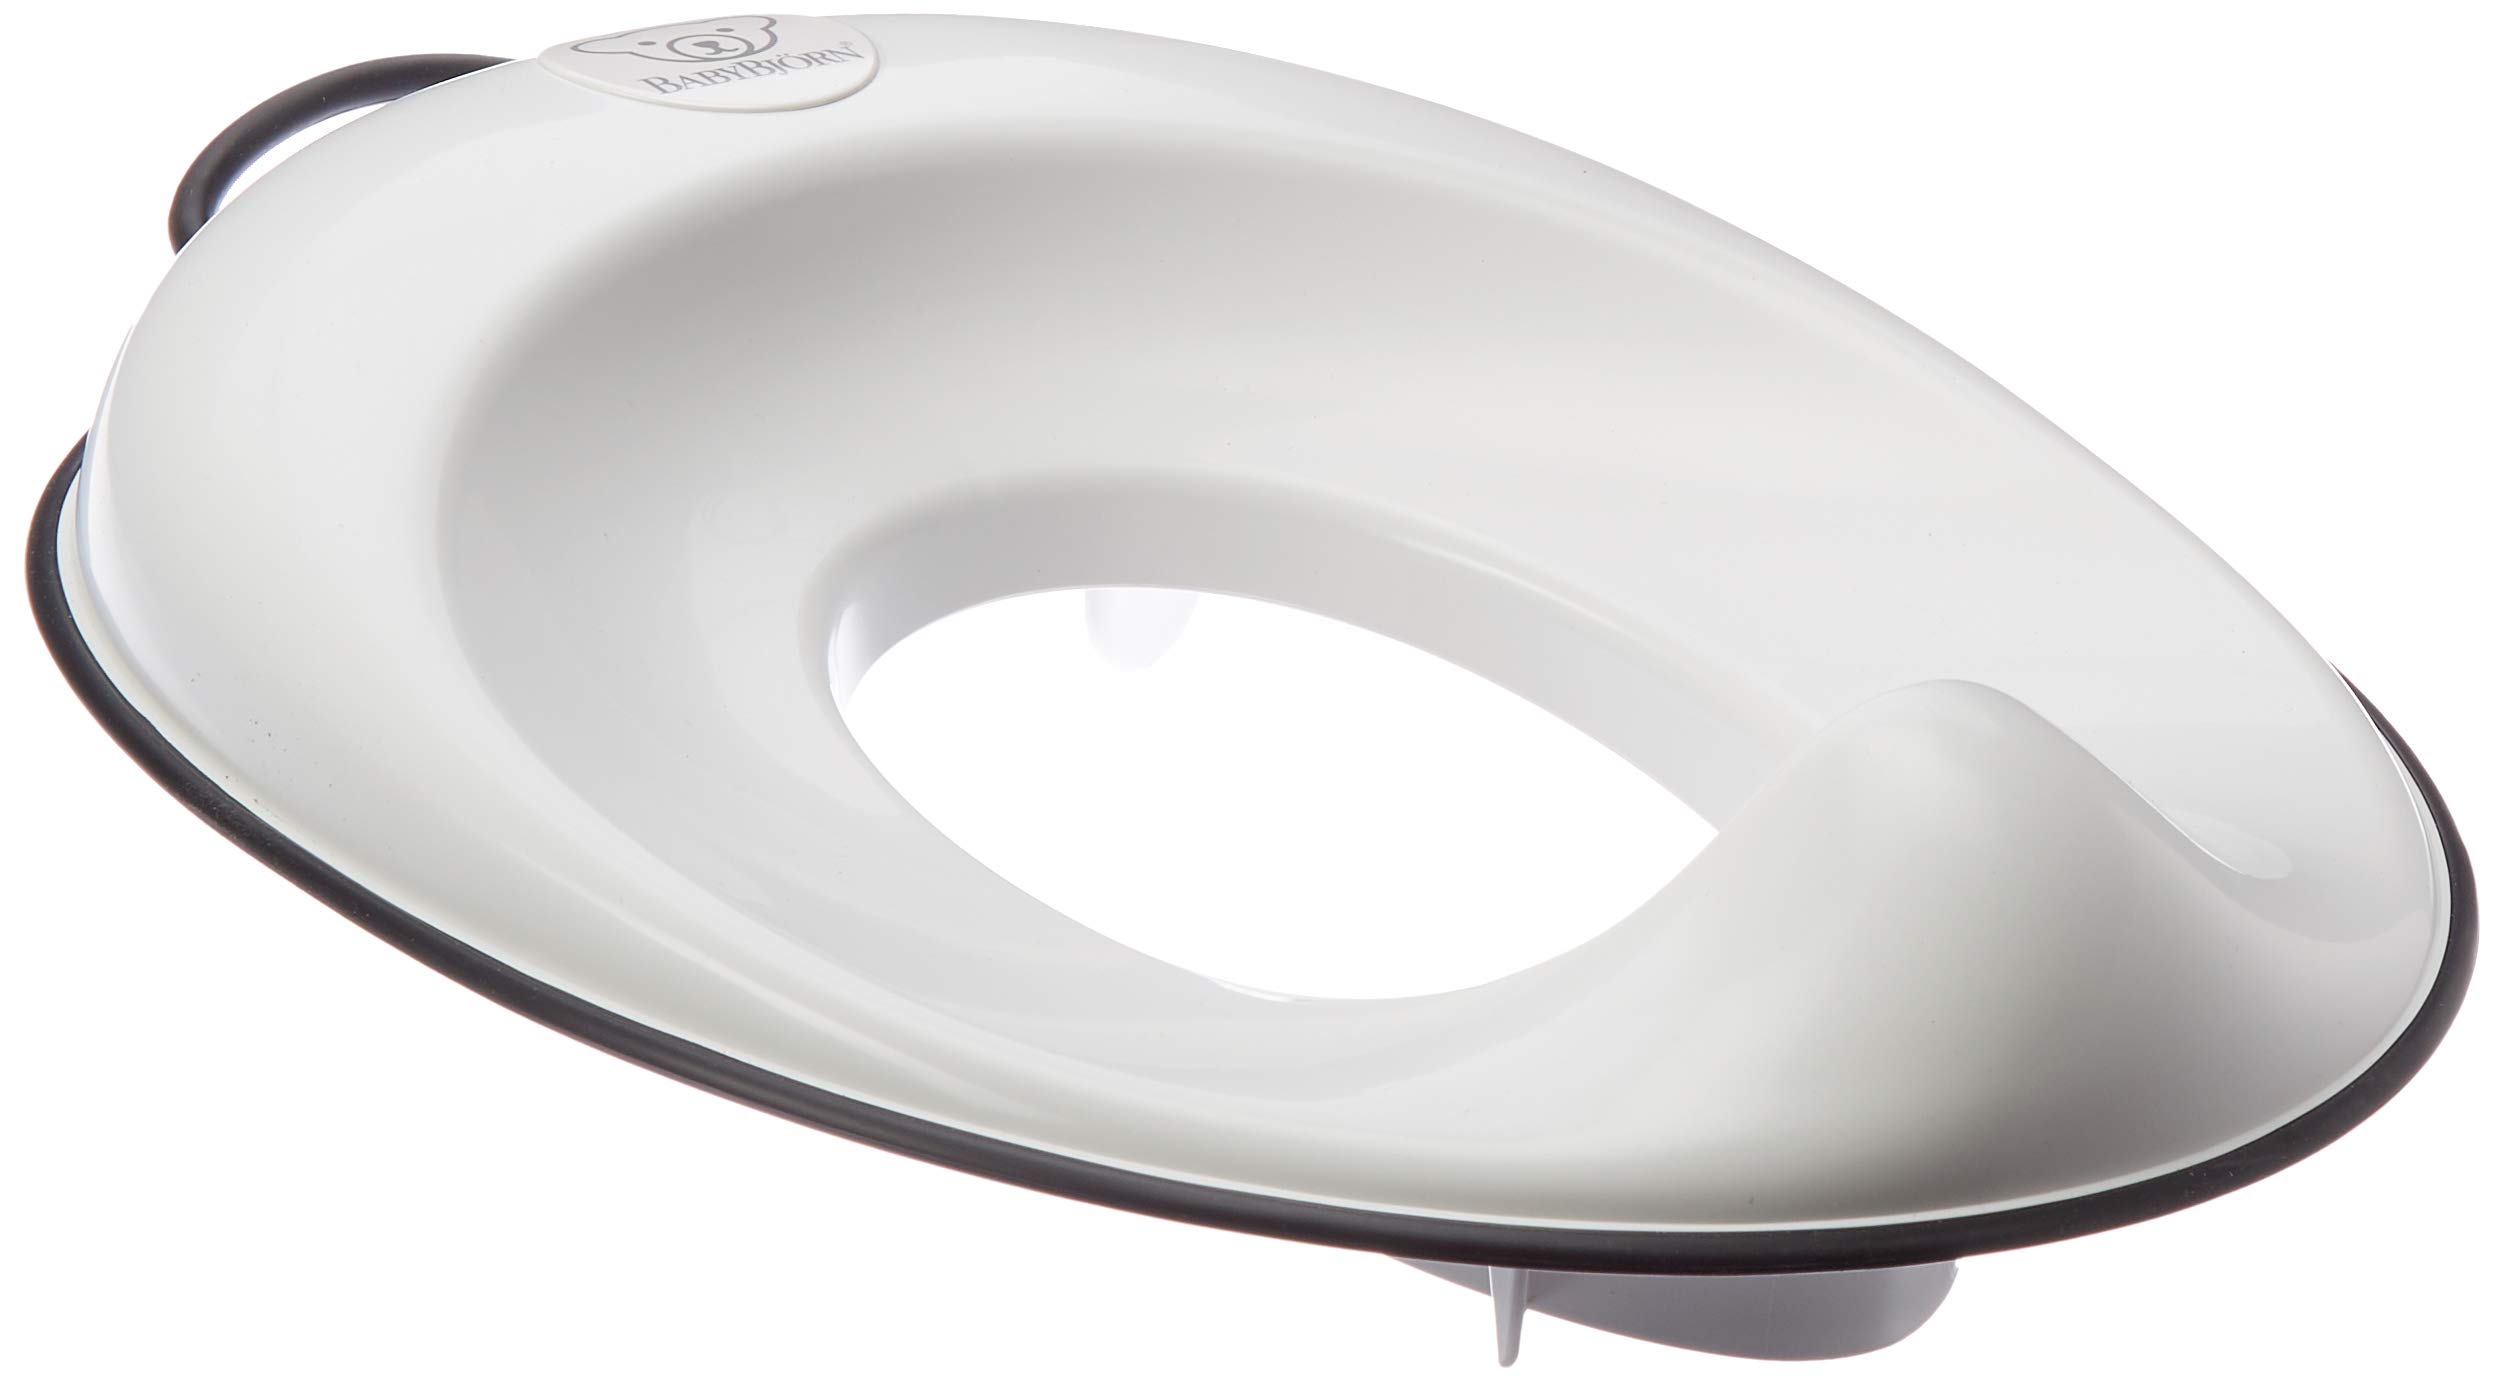 the baby bjorn toilet trainer Baby bjorn toilet trainer potty seat from one step ahead